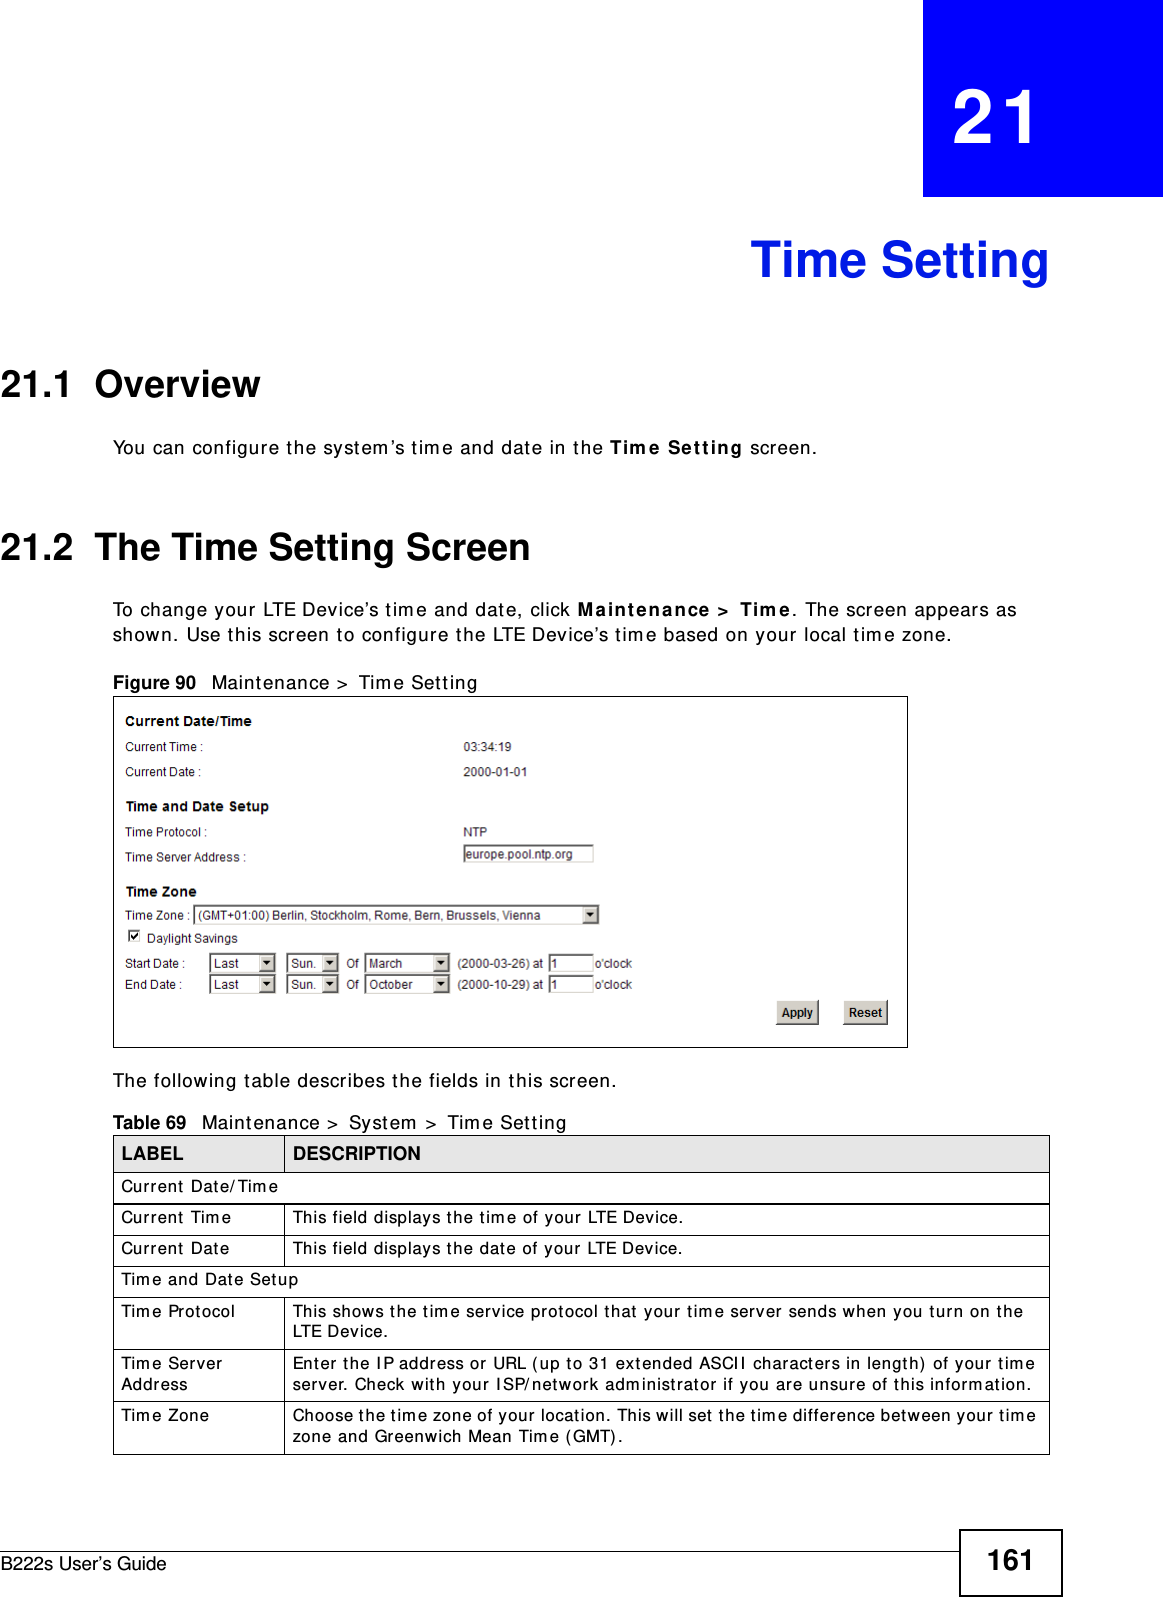 B222s User’s Guide 161CHAPTER   21Time Setting21.1  Overview You can configure t he syst em ’s t im e and dat e in t he Tim e Se t t in g scr een.21.2  The Time Setting Screen To change your LTE Device’s t im e and date, click M a int e n a n ce &gt;  Tim e . The screen appears as shown. Use this screen to configure t he LTE Device’s t im e based on your local t im e zone. Figure 90   Maint enance &gt;  Tim e Sett ing The following t able describes t he fields in t his screen. Table 69   Maintenance &gt;  System  &gt;  Tim e Set tingLABEL DESCRIPTIONCurrent Dat e/ Tim e Current Tim e  This field displays the tim e of your LTE Device.Current Dat e  This field displays the dat e of your LTE Device. Tim e and Date Set up Tim e Prot ocol This show s t he t im e ser vice prot ocol that your t im e server sends when you turn on t he LTE D e v i c e .  Tim e Server Address Enter t he I P address or URL ( up t o 31 extended ASCI I  charact ers in length)  of your t im e server. Check with your I SP/ network adm inist rat or if you are unsure of this inform at ion.Tim e Zone Choose t he t im e zone of your locat ion. This will set  the tim e difference bet ween your t im e zone and Greenwich Mean Tim e ( GMT) . 